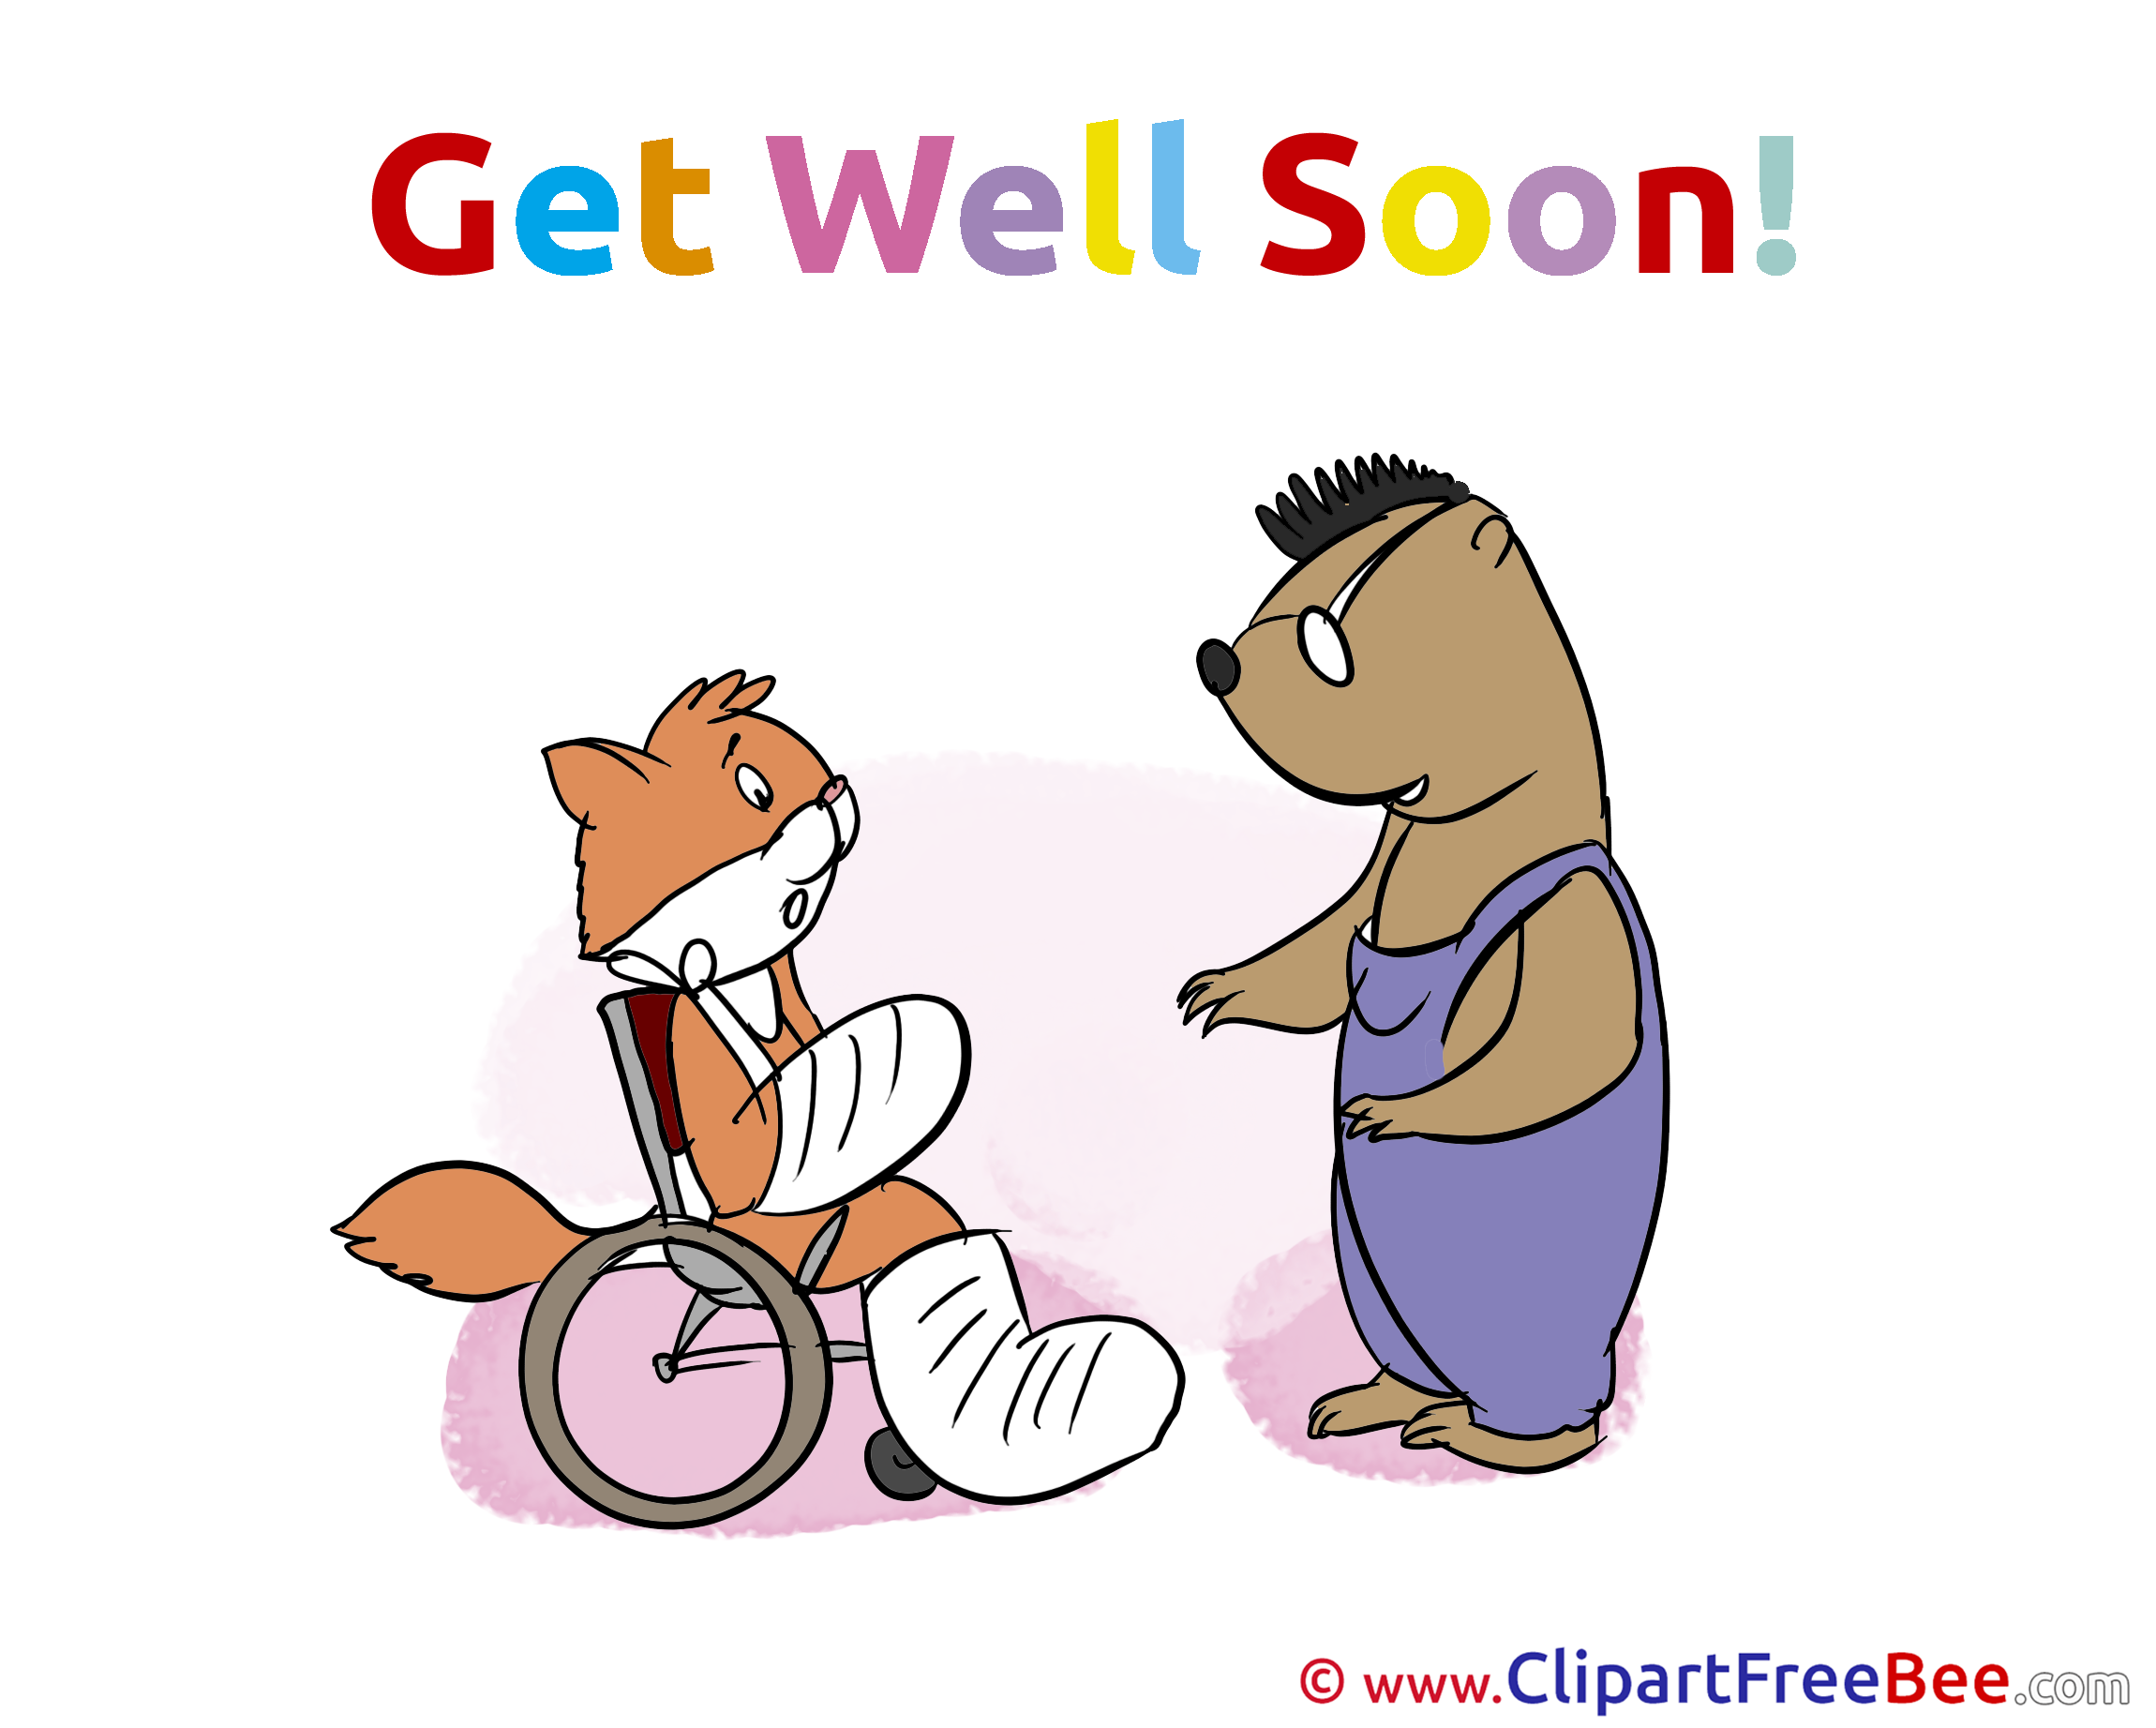 Get better picture. Get well soon pic. Get well soon группа. Get well открытка. Открытка get well soon.